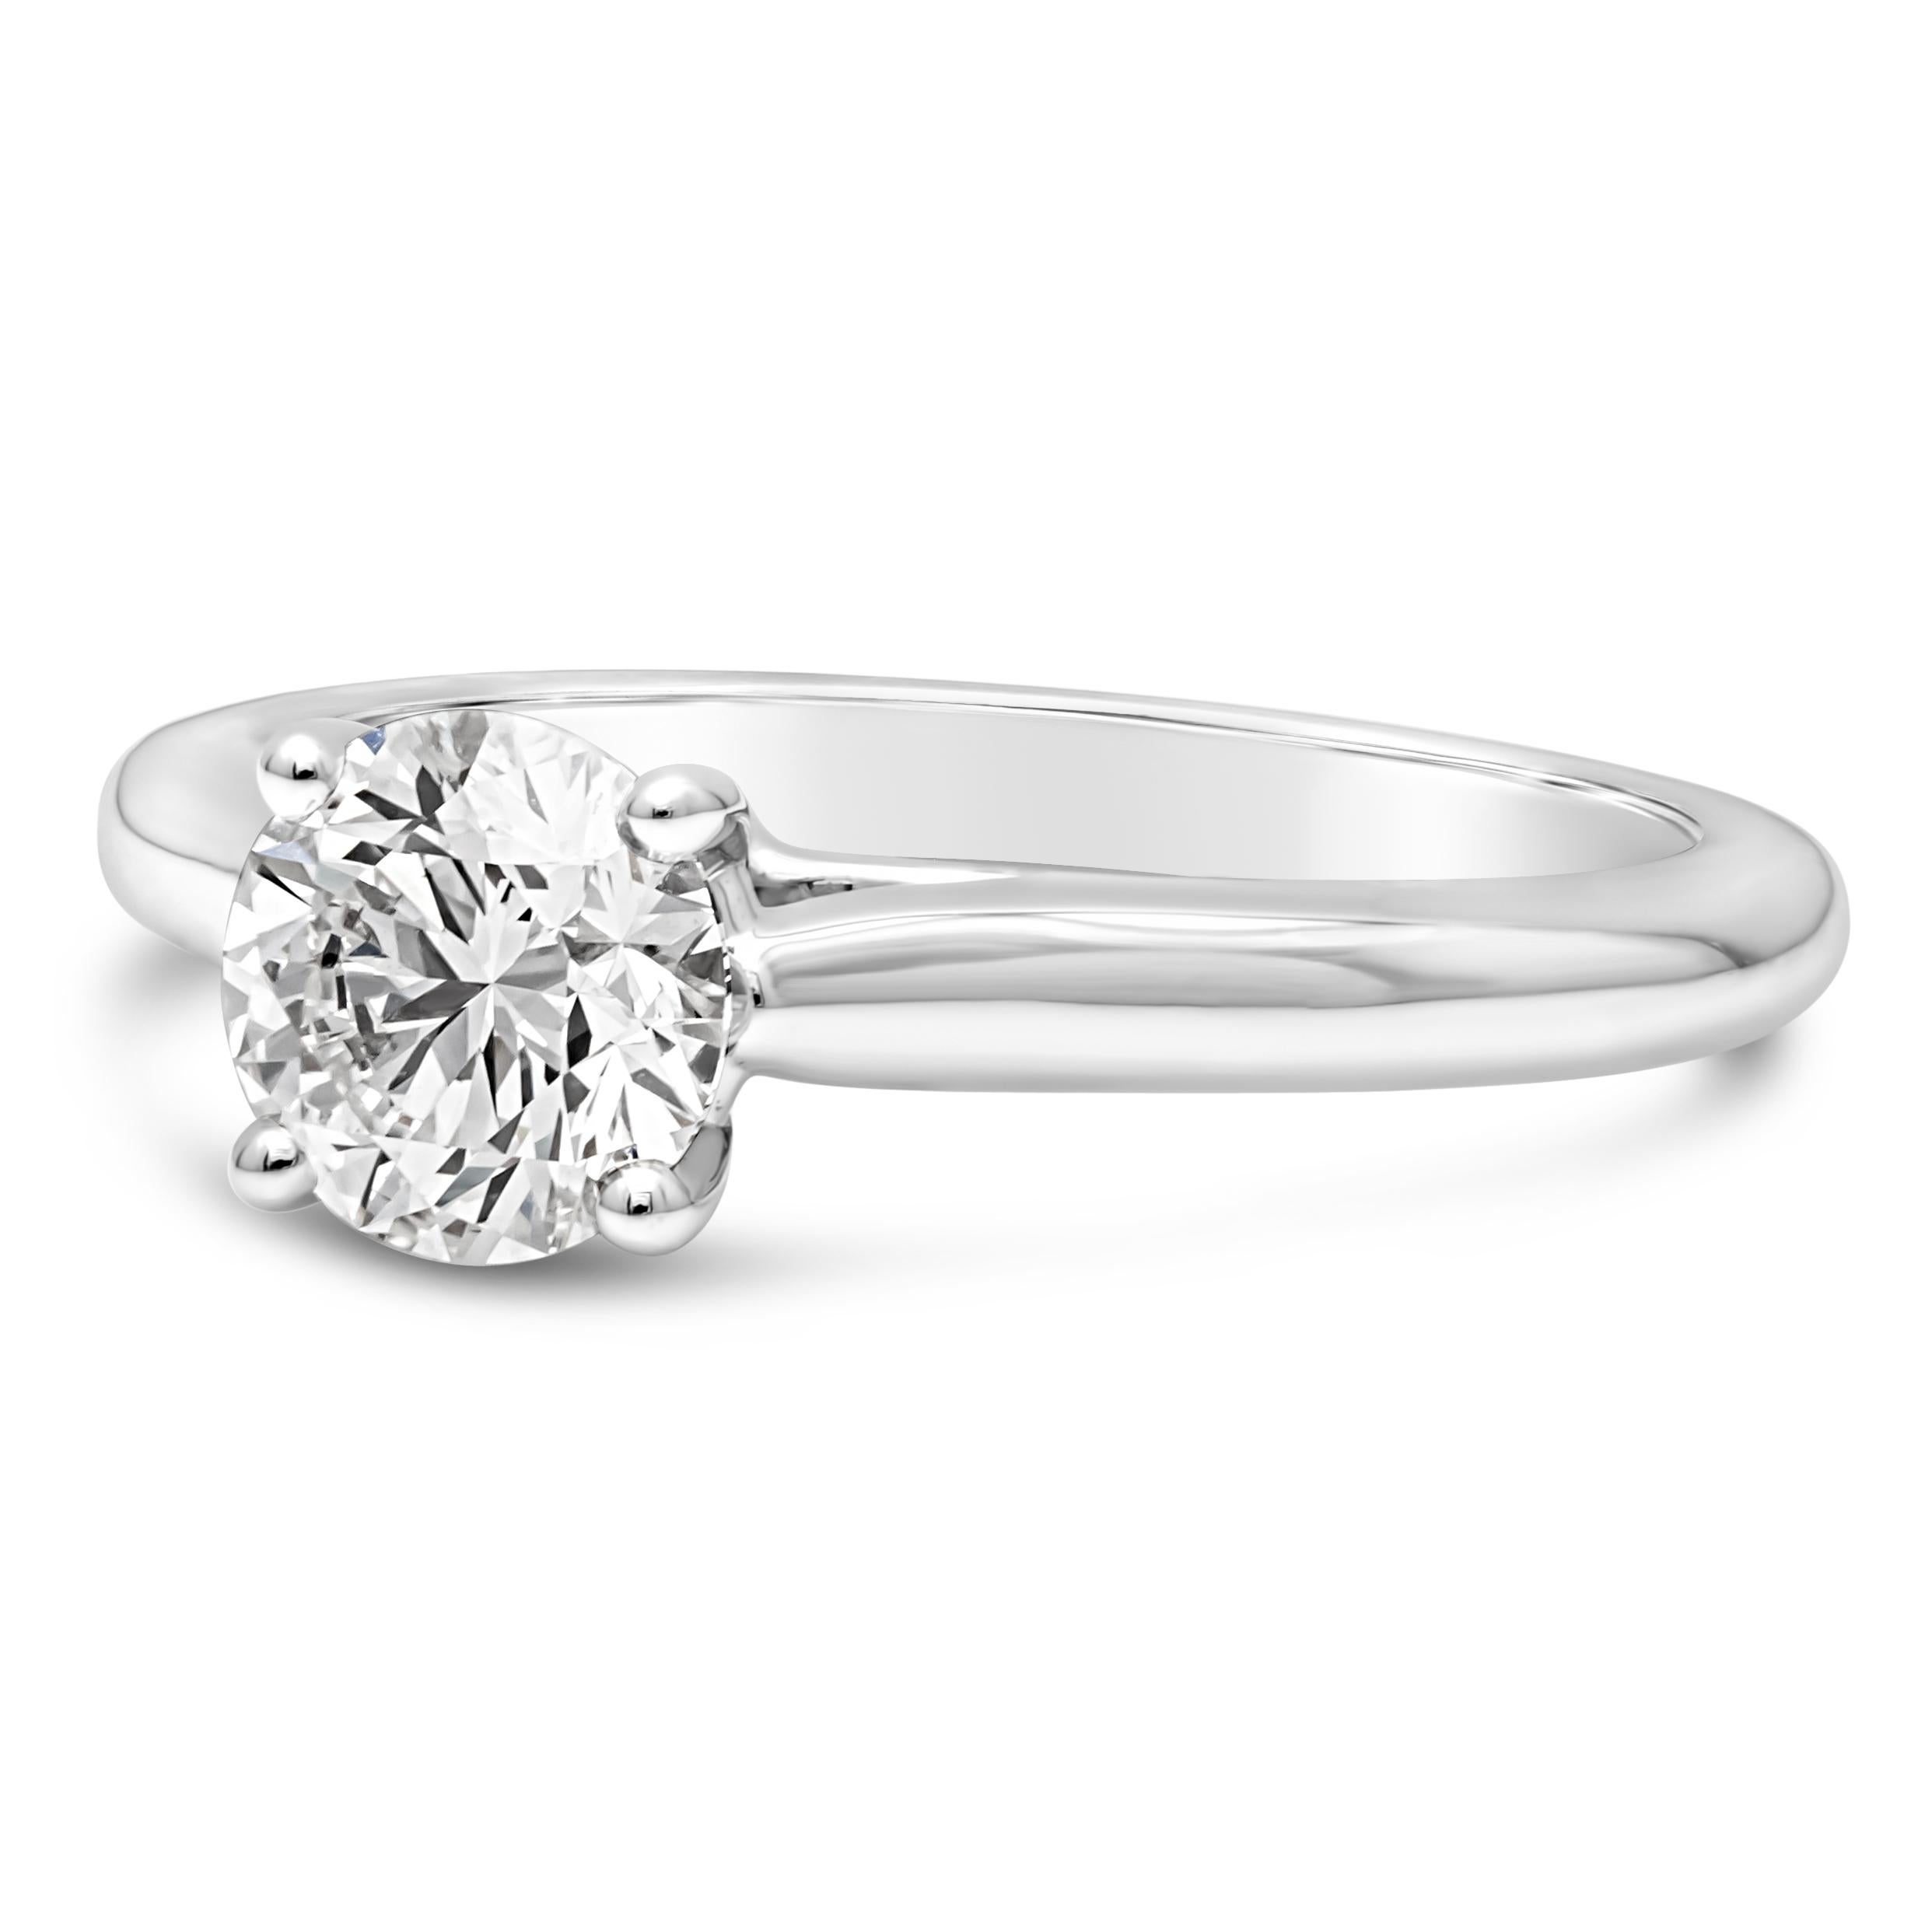 A classic and timeless engagement ring style, showcasing a 0.90 carat round brilliant cut diamond certified by GIA as G color and VVS1 clarity, set on a traditional solitaire four prong basket setting. Finely made with a platinum band. Size 5.75 US,